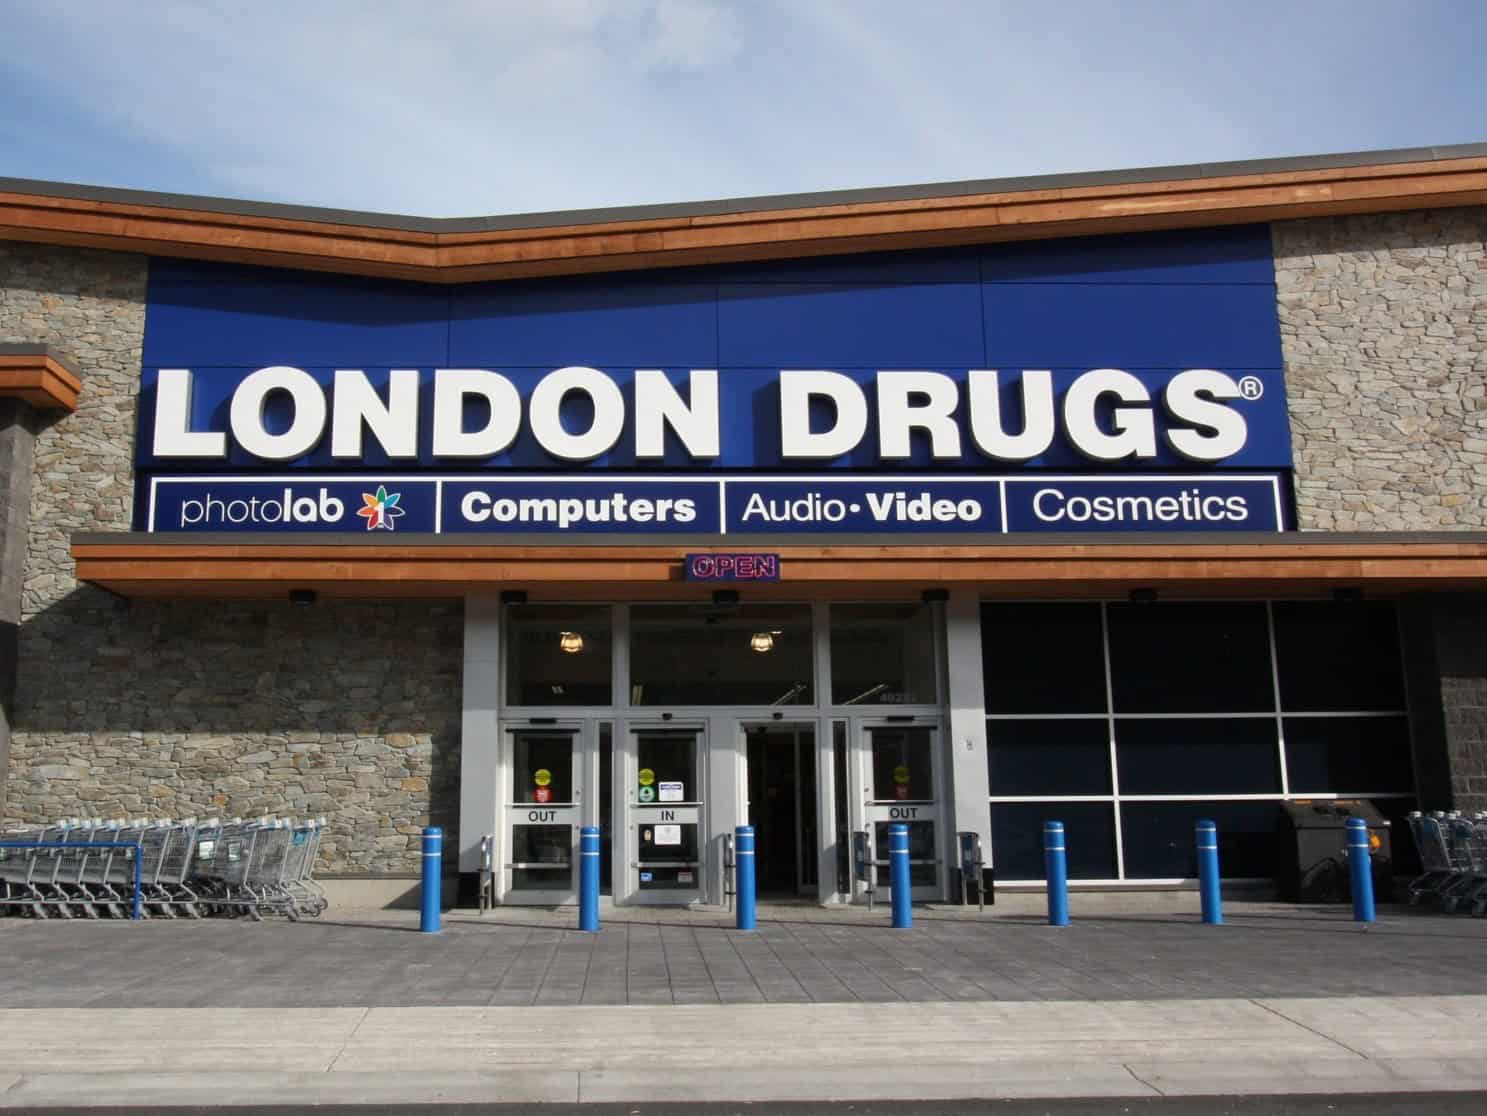 A London Drugs location.